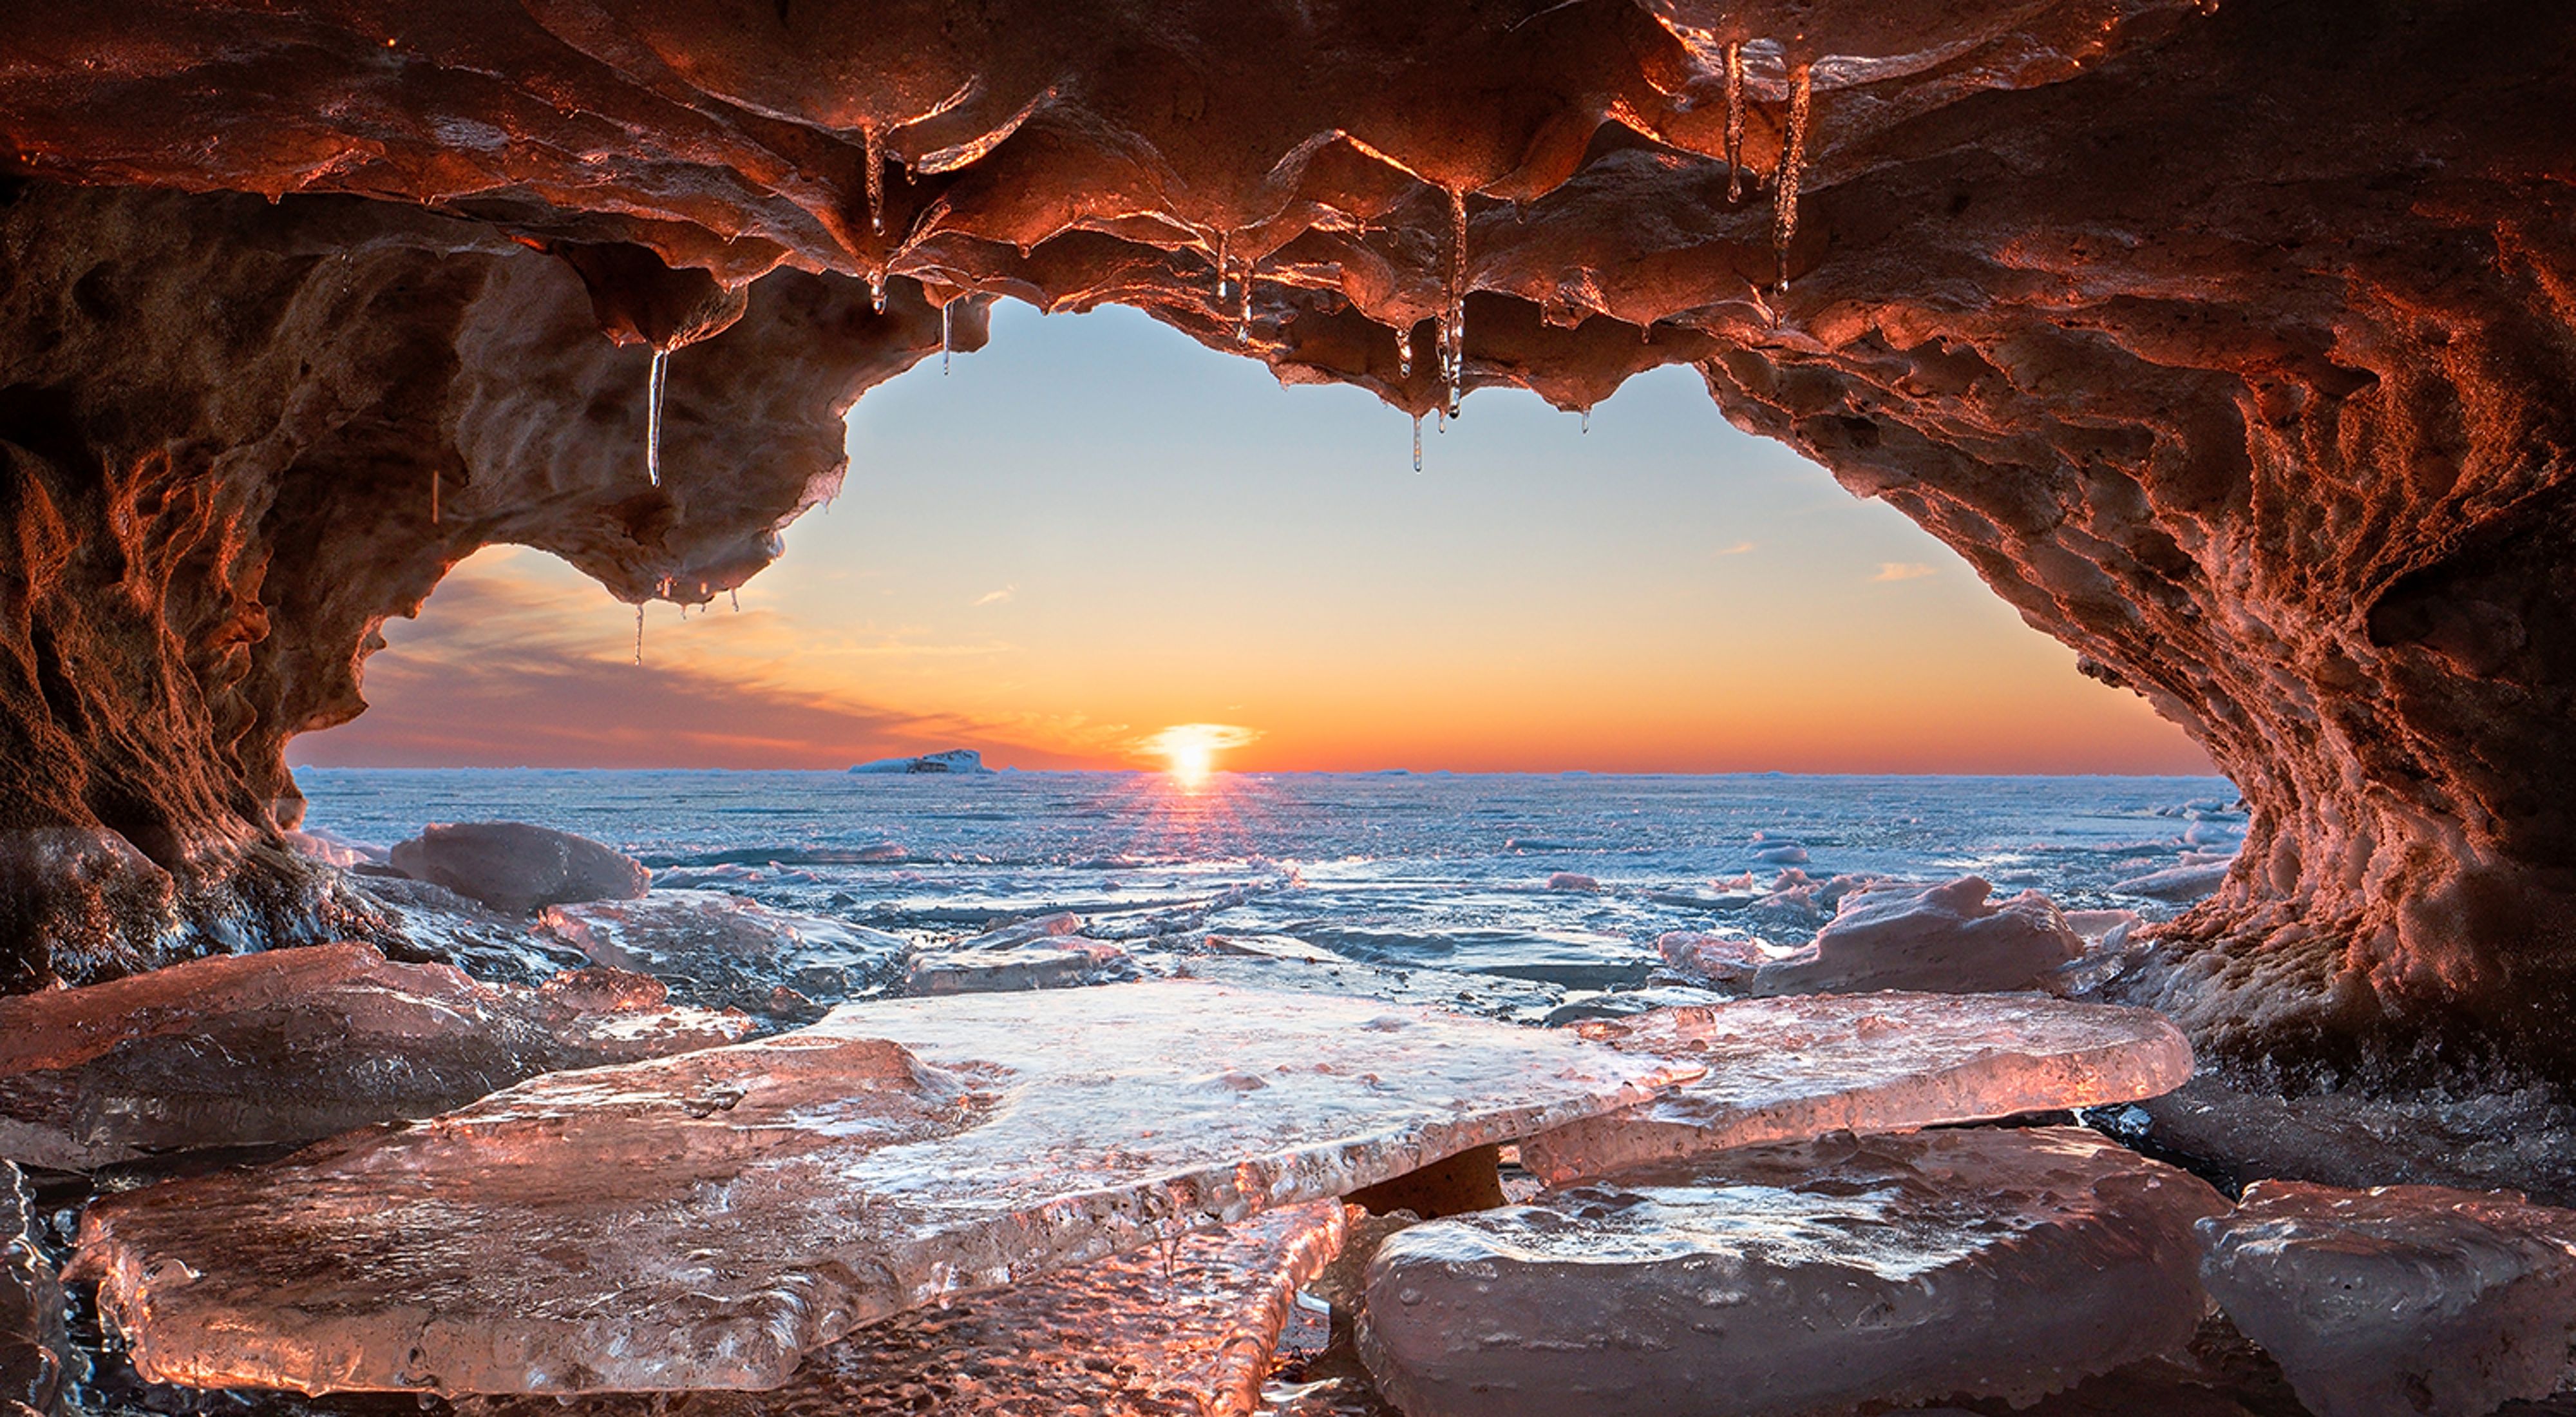 A small inlet within an ice shelf along the shoreline of Lake Michigan. Ice covers the ground as water rushes in. The sun sets on the horizon.